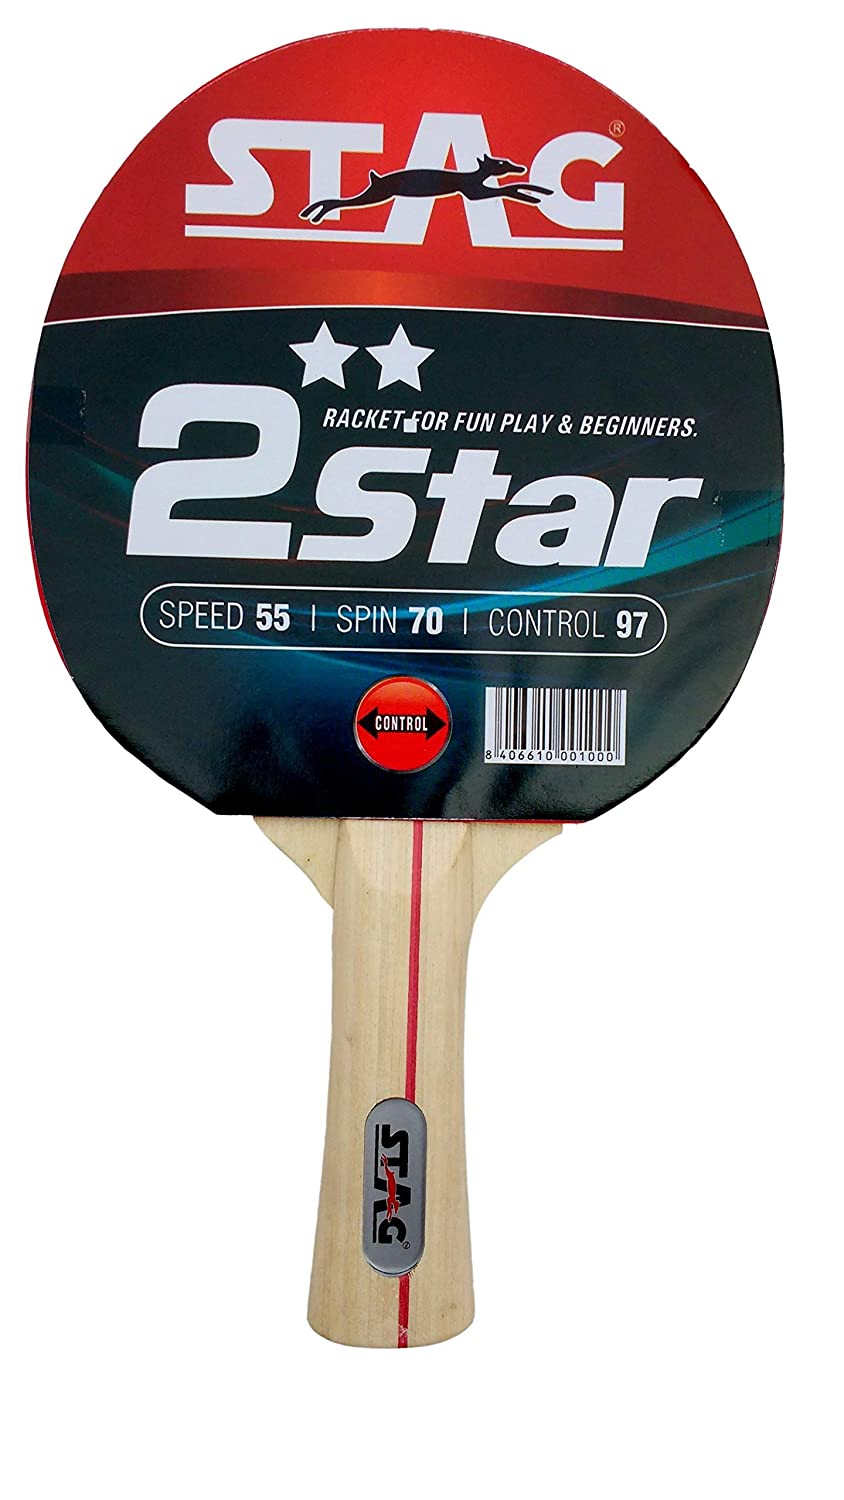 Stag 2 Star Table Tennis Play Set (2 Bats and 3 Balls), Red/Black - Best Price online Prokicksports.com